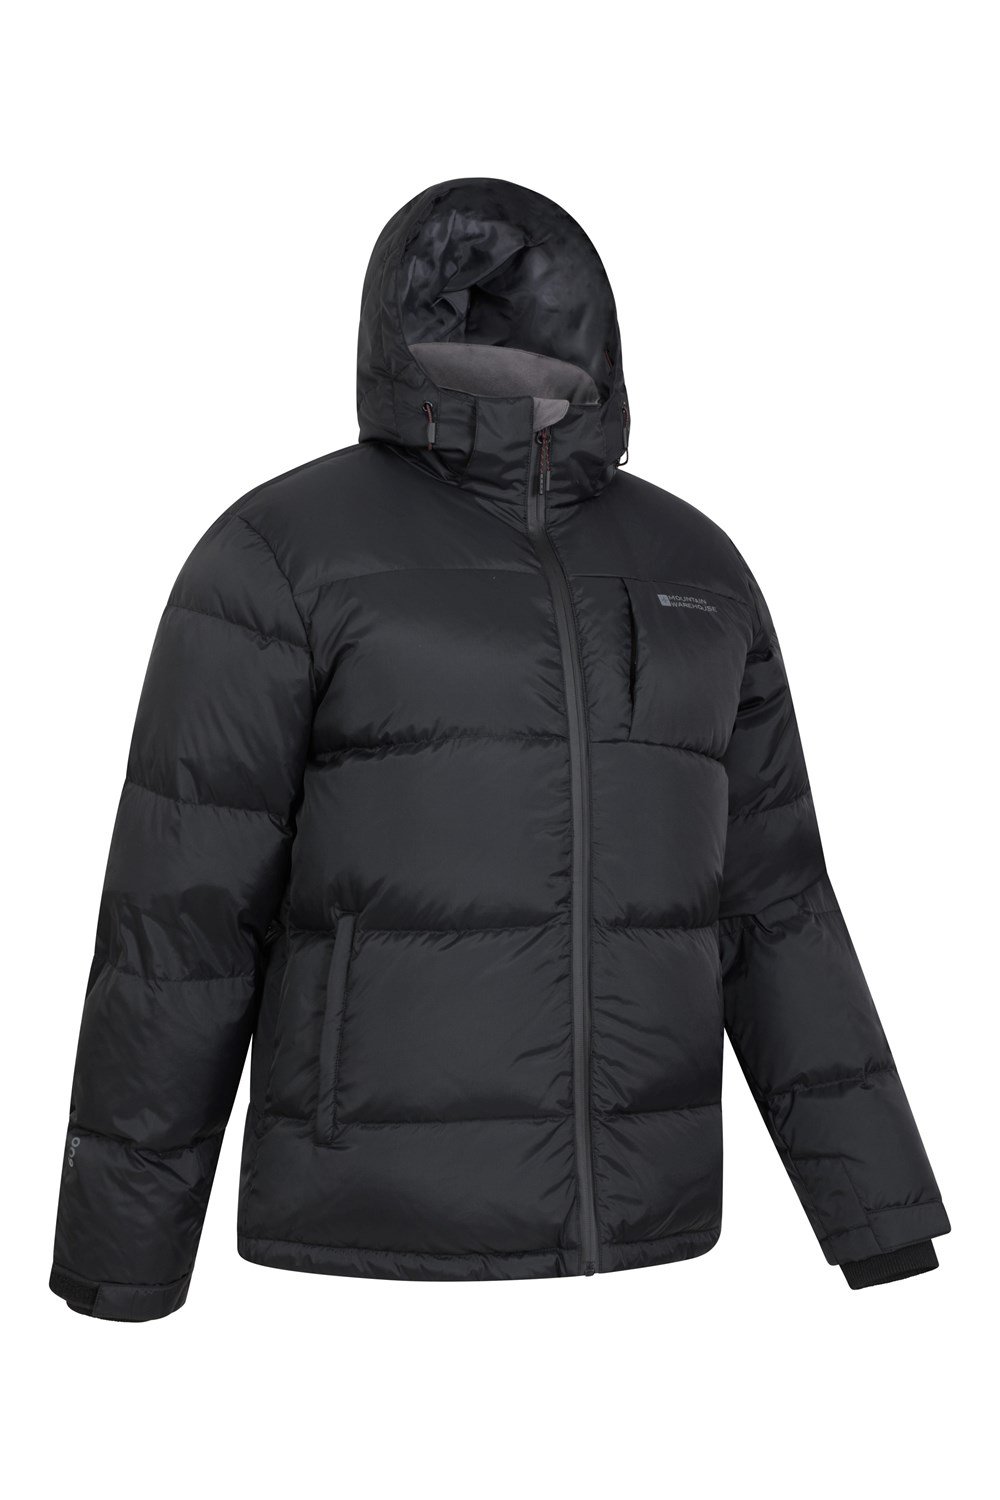 Mountain Warehouse Frost Men's Padded Down Jacket Water Resistant ...